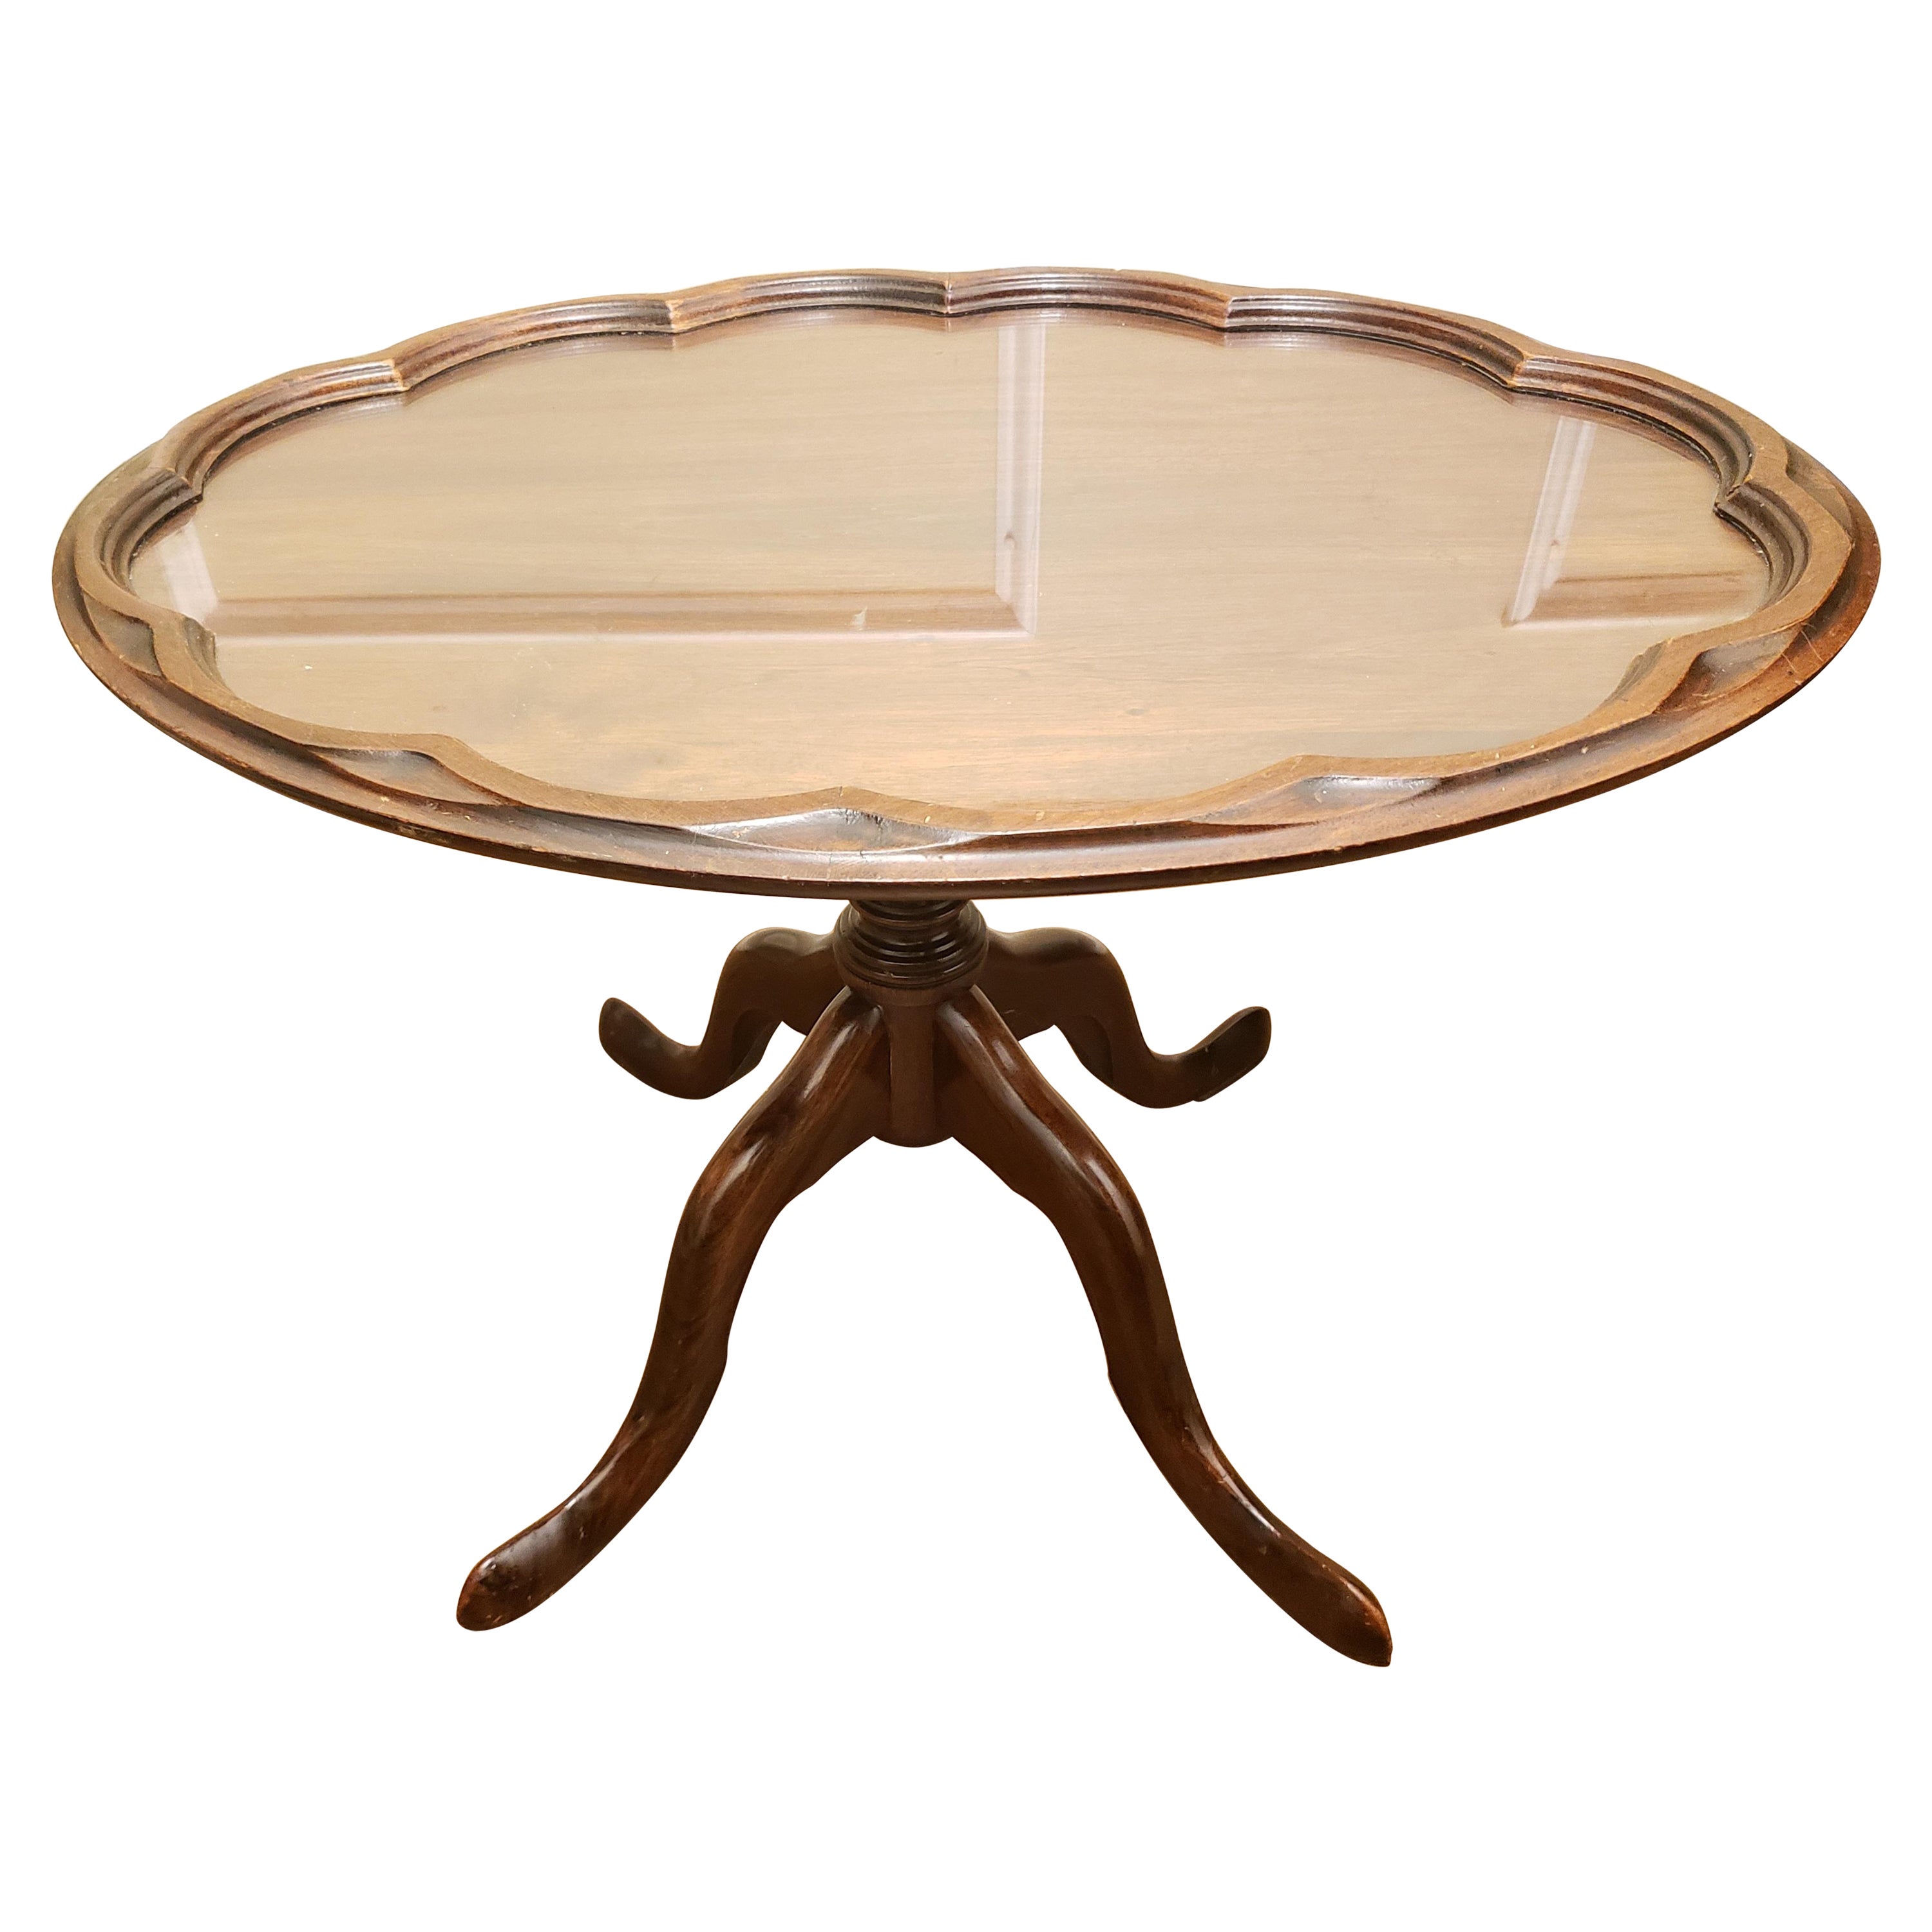 Georgian style vintage mahogany tray top pedestal table. Loose tray top.
Clean vintage condition of the 1940s. Measures 26.5W x 19.25D x 19H. Four legs pedestal for greater stability.